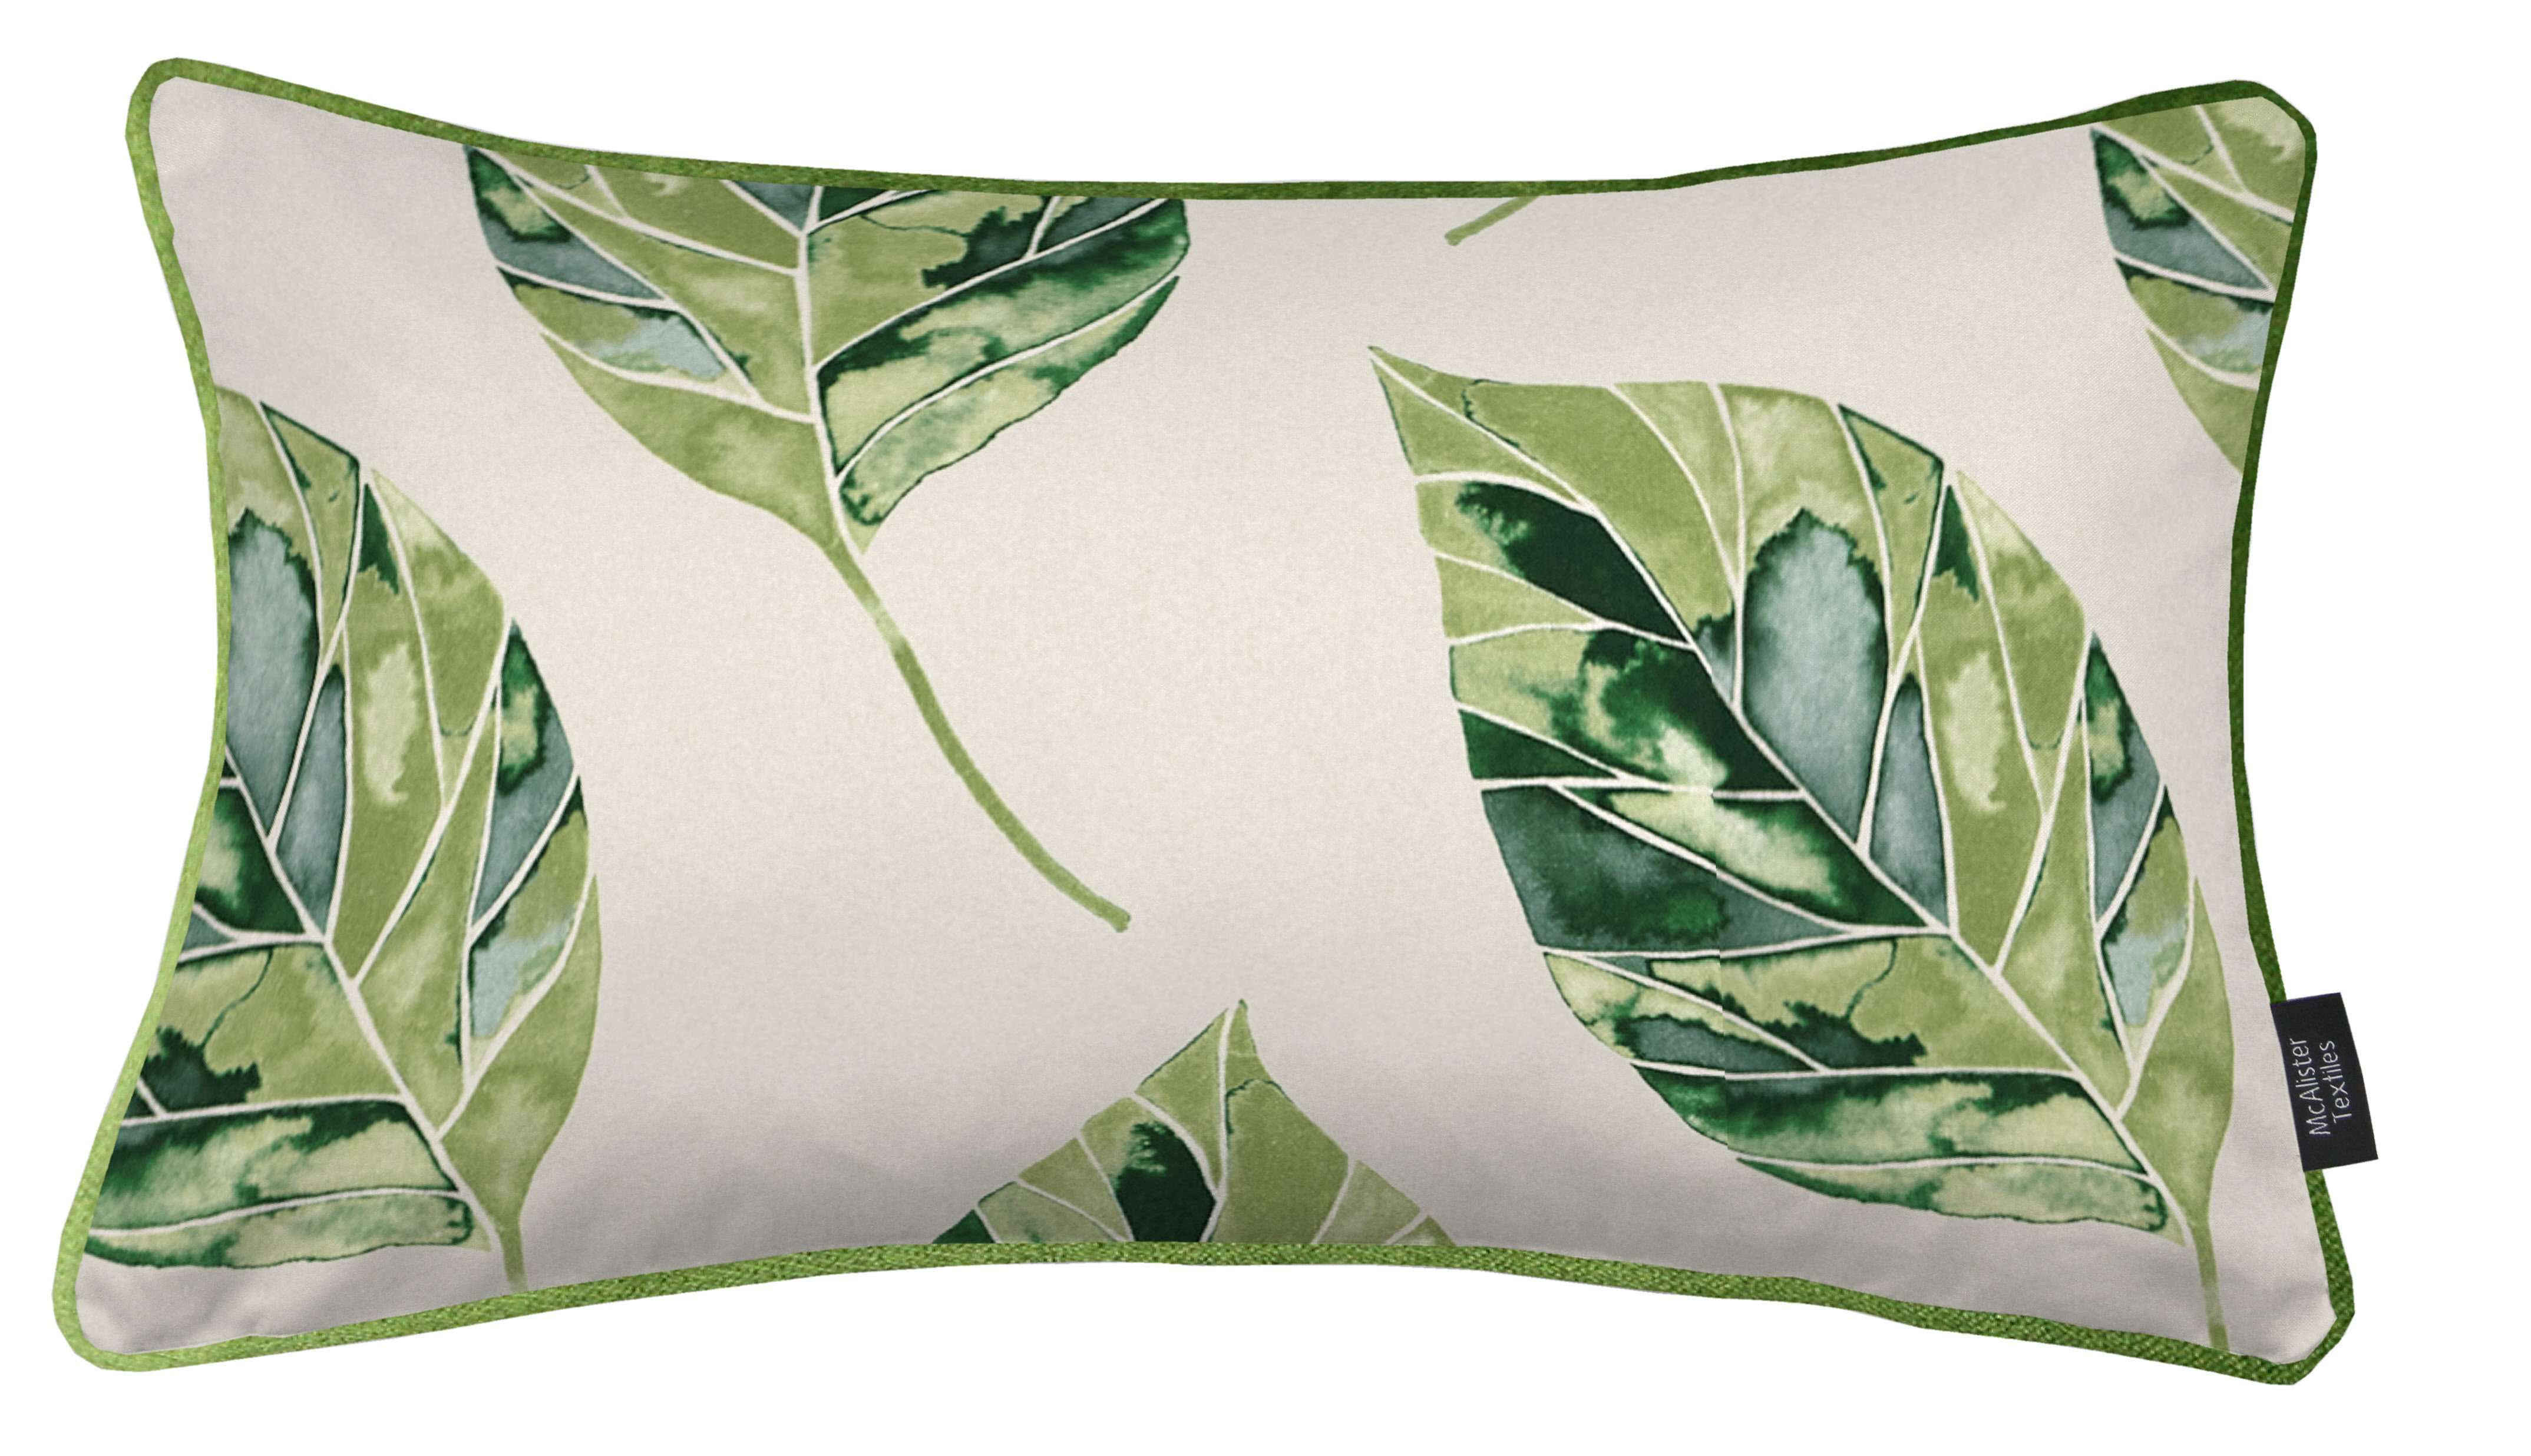 McAlister Textiles Leaf Forest Green Floral Cotton Print Piped Edge Pillows Pillow Cover Only 50cm x 30cm 